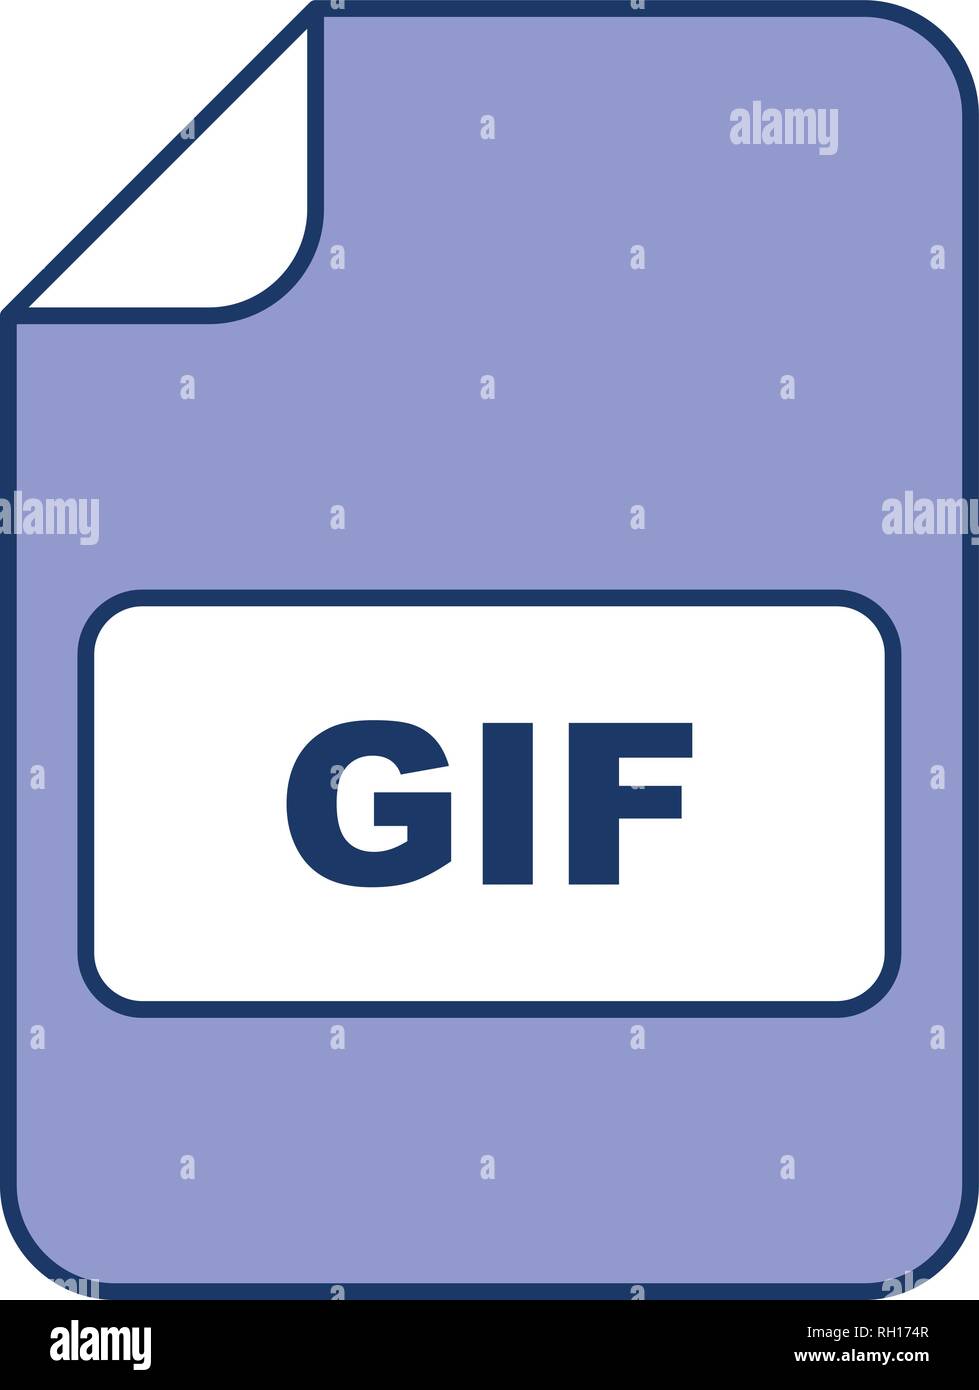 Gif Image File Extension Icon Stock Illustration - Download Image Now -  2015, Computer, Computer Graphic - iStock